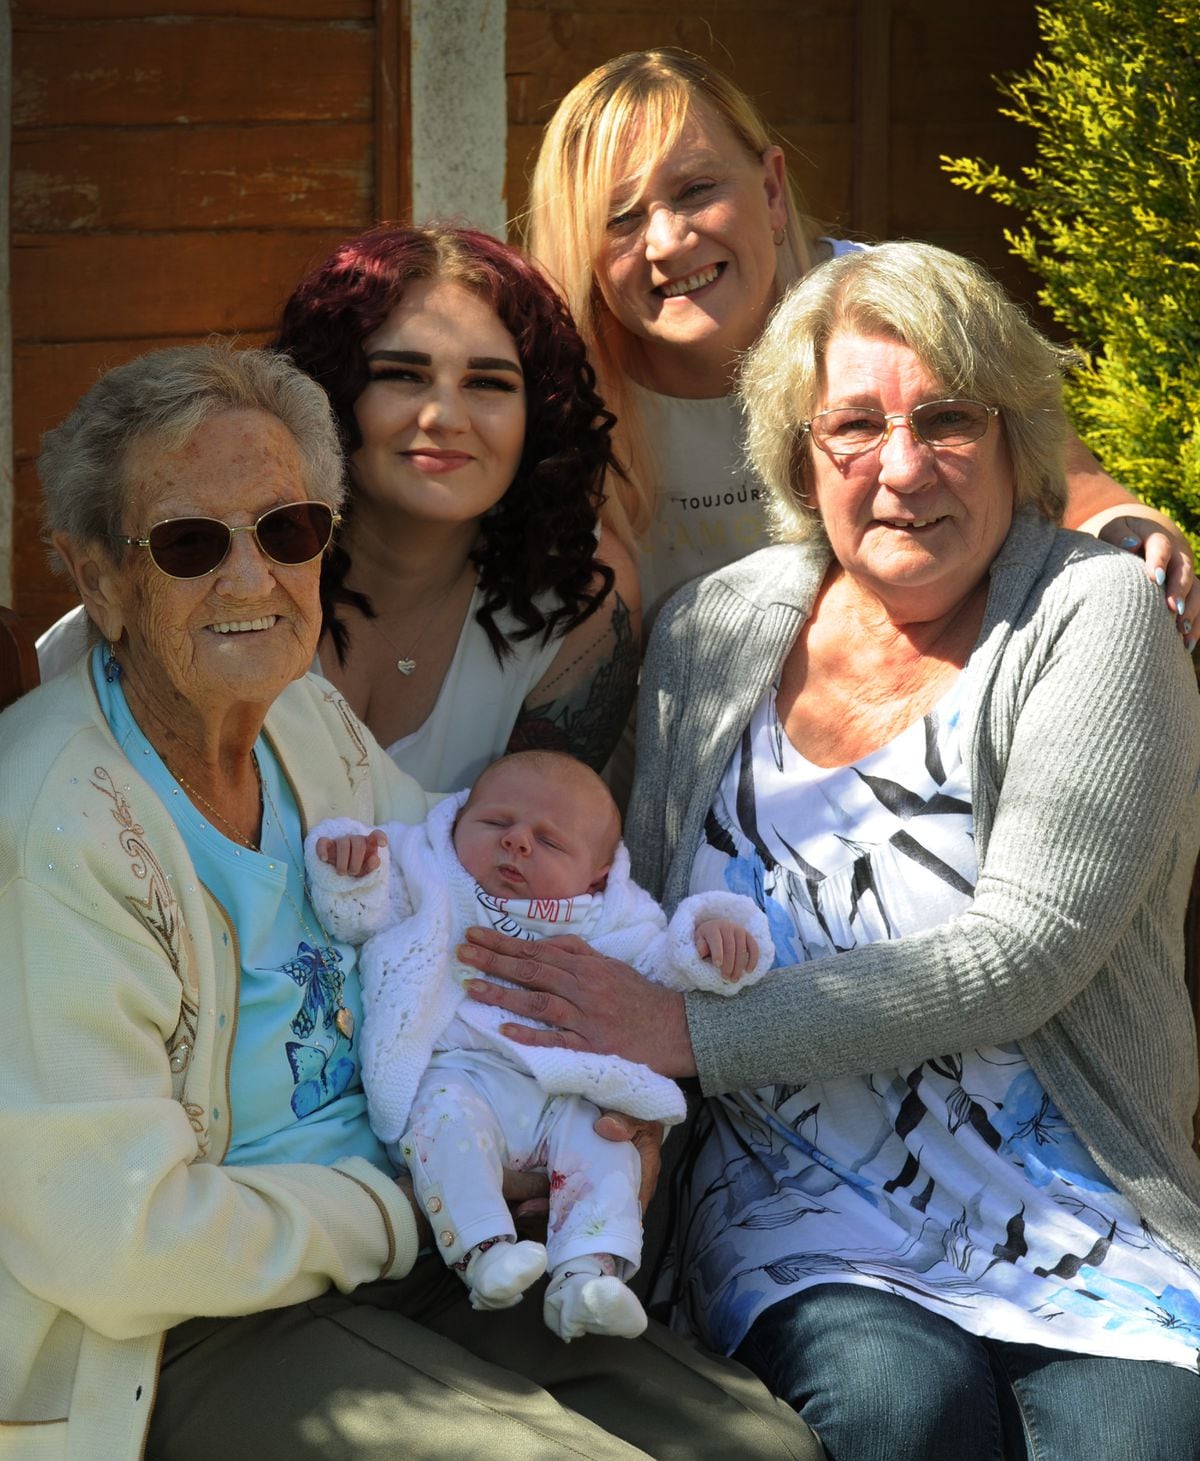 Five generations with the latest addition Harlee-Maie Clewley, aged 4 weeks, Eileen Wassall, aged 95, Olivia Read, aged 24, Elizabeth Mullin, aged 41, and Katie Lockley, aged 60